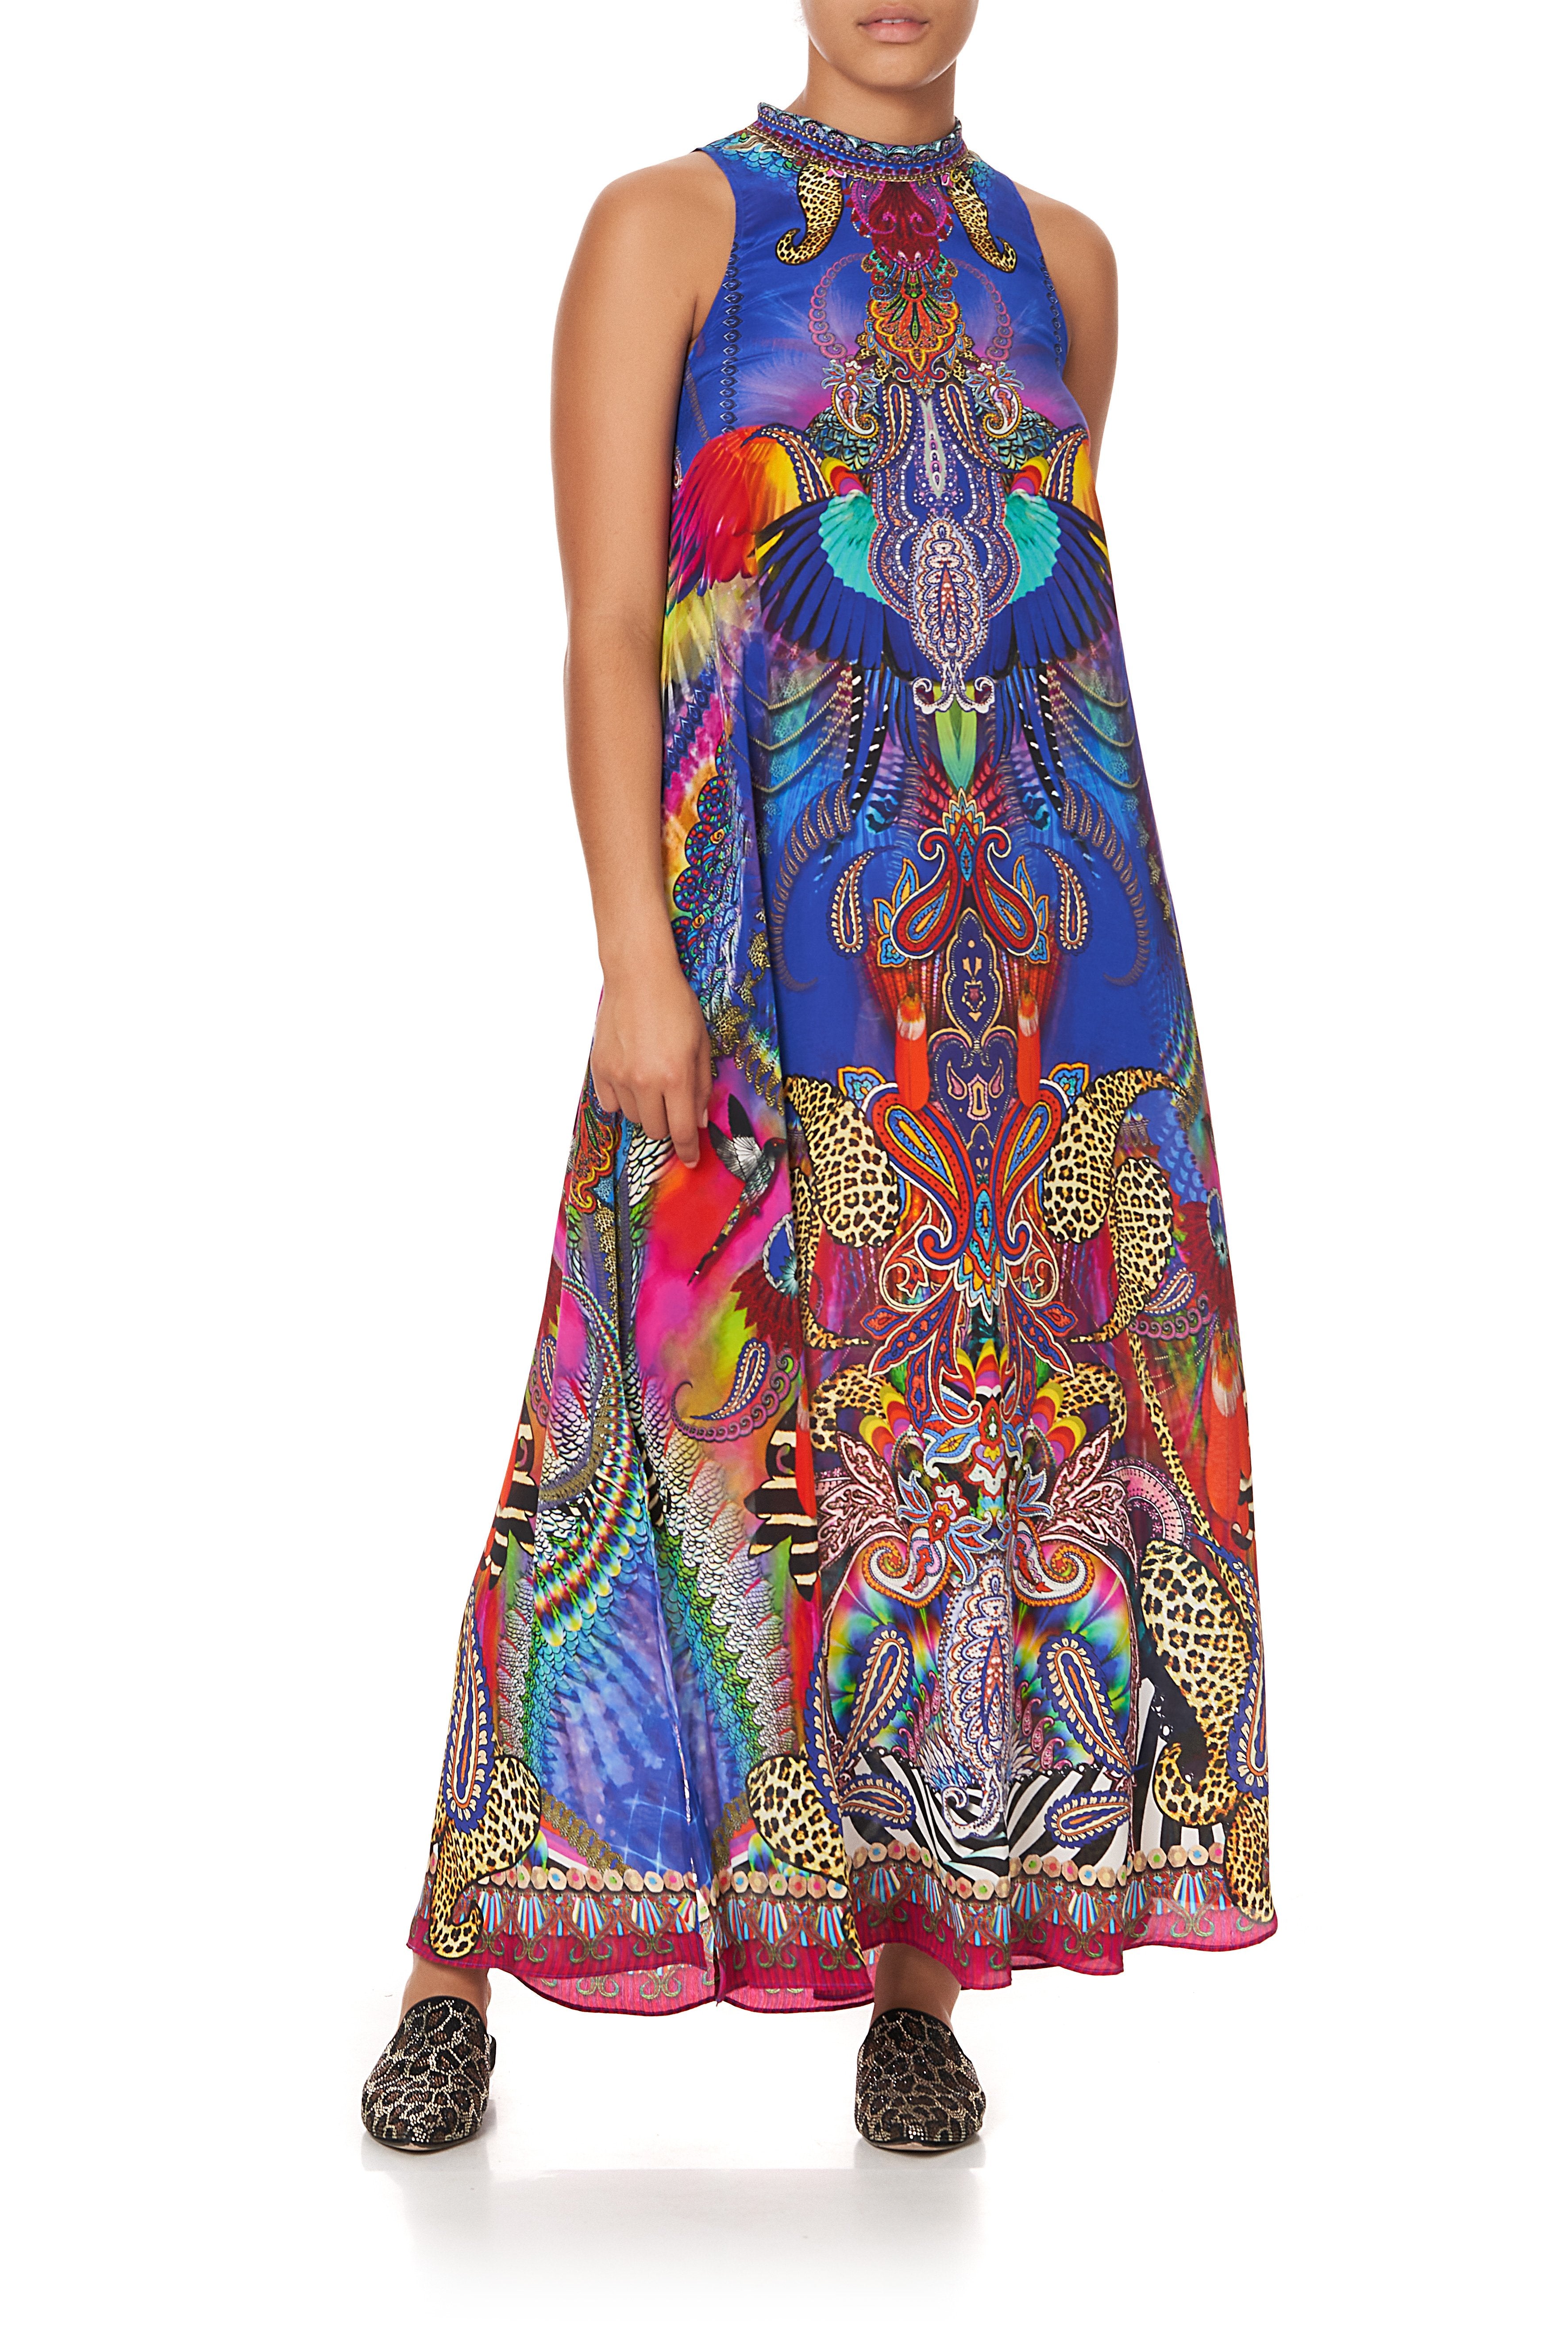 HIGH NECK DRESS WITH BACK NECK TIE PSYCHEDELICA